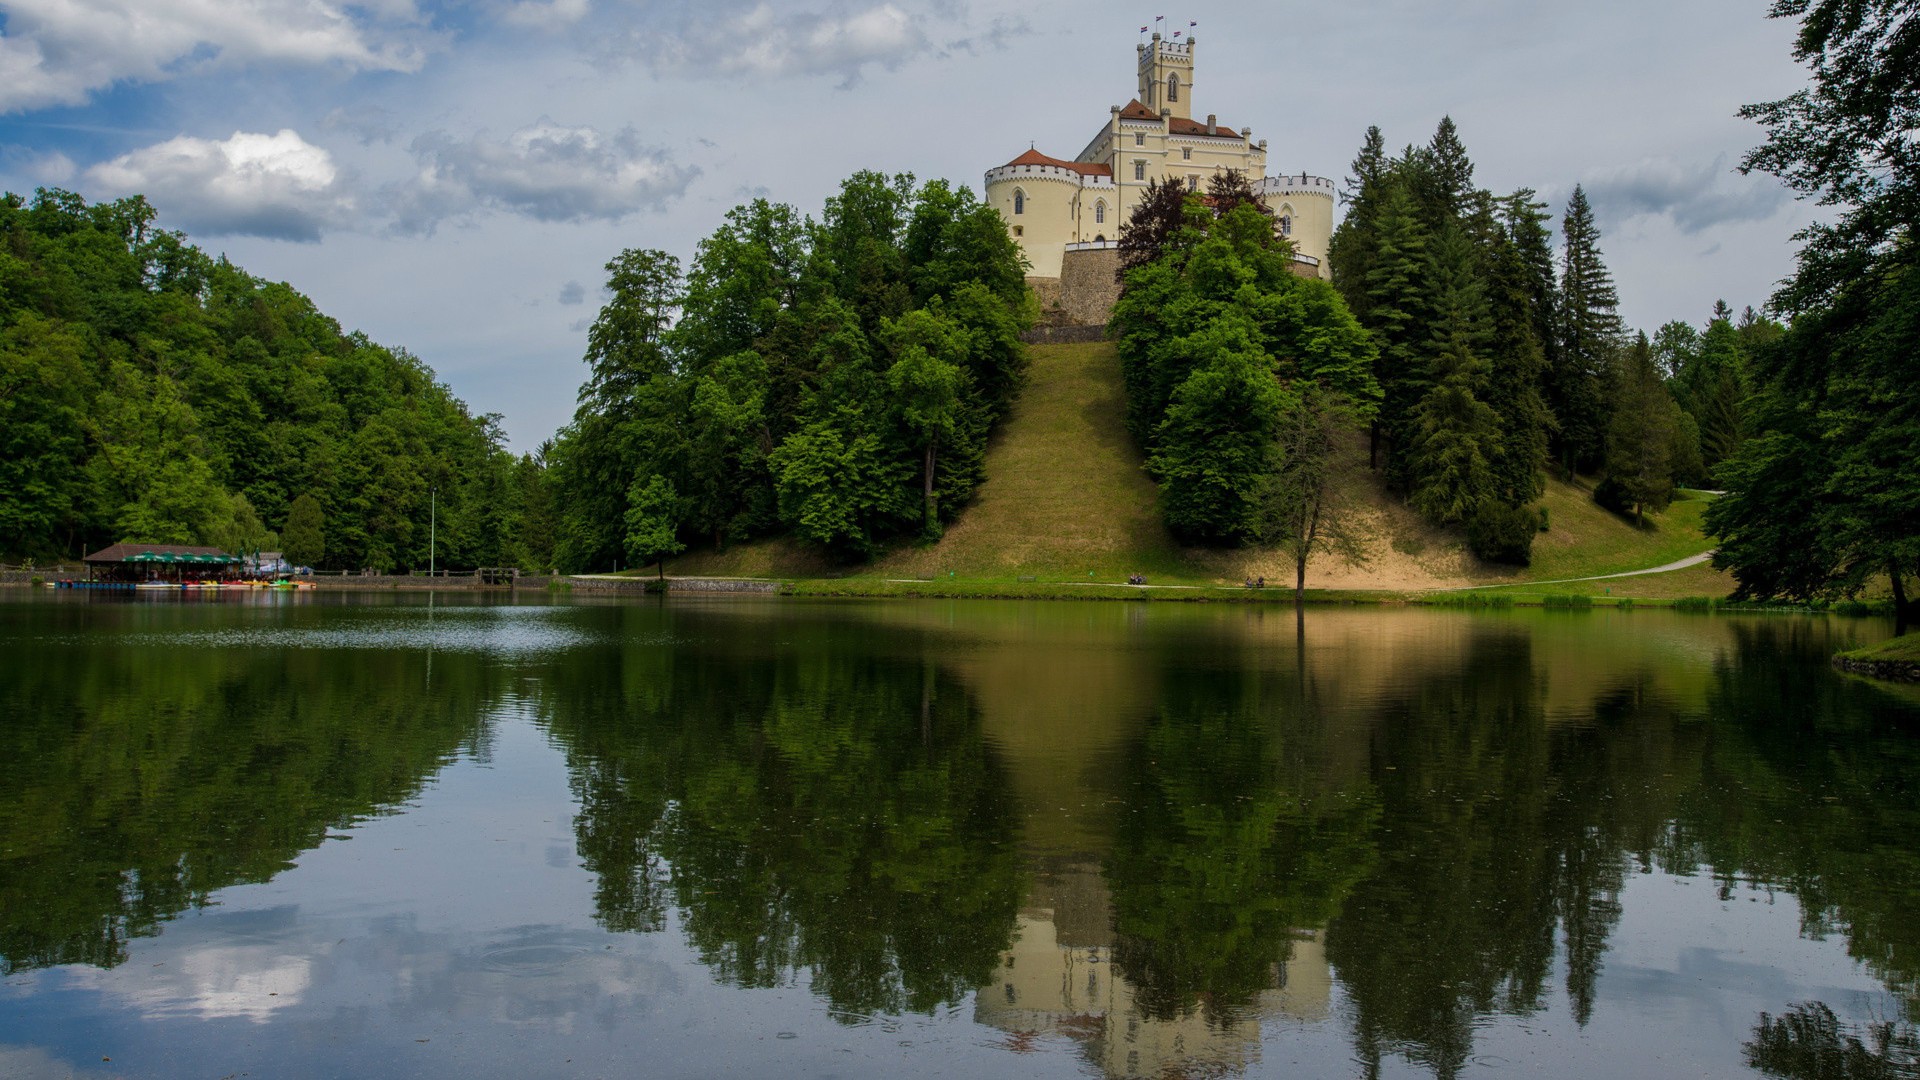 General 1920x1080 architecture ancient castle trees nature forest water lake hills grass reflection tower flag clouds path Croatia Europe Trakoščan